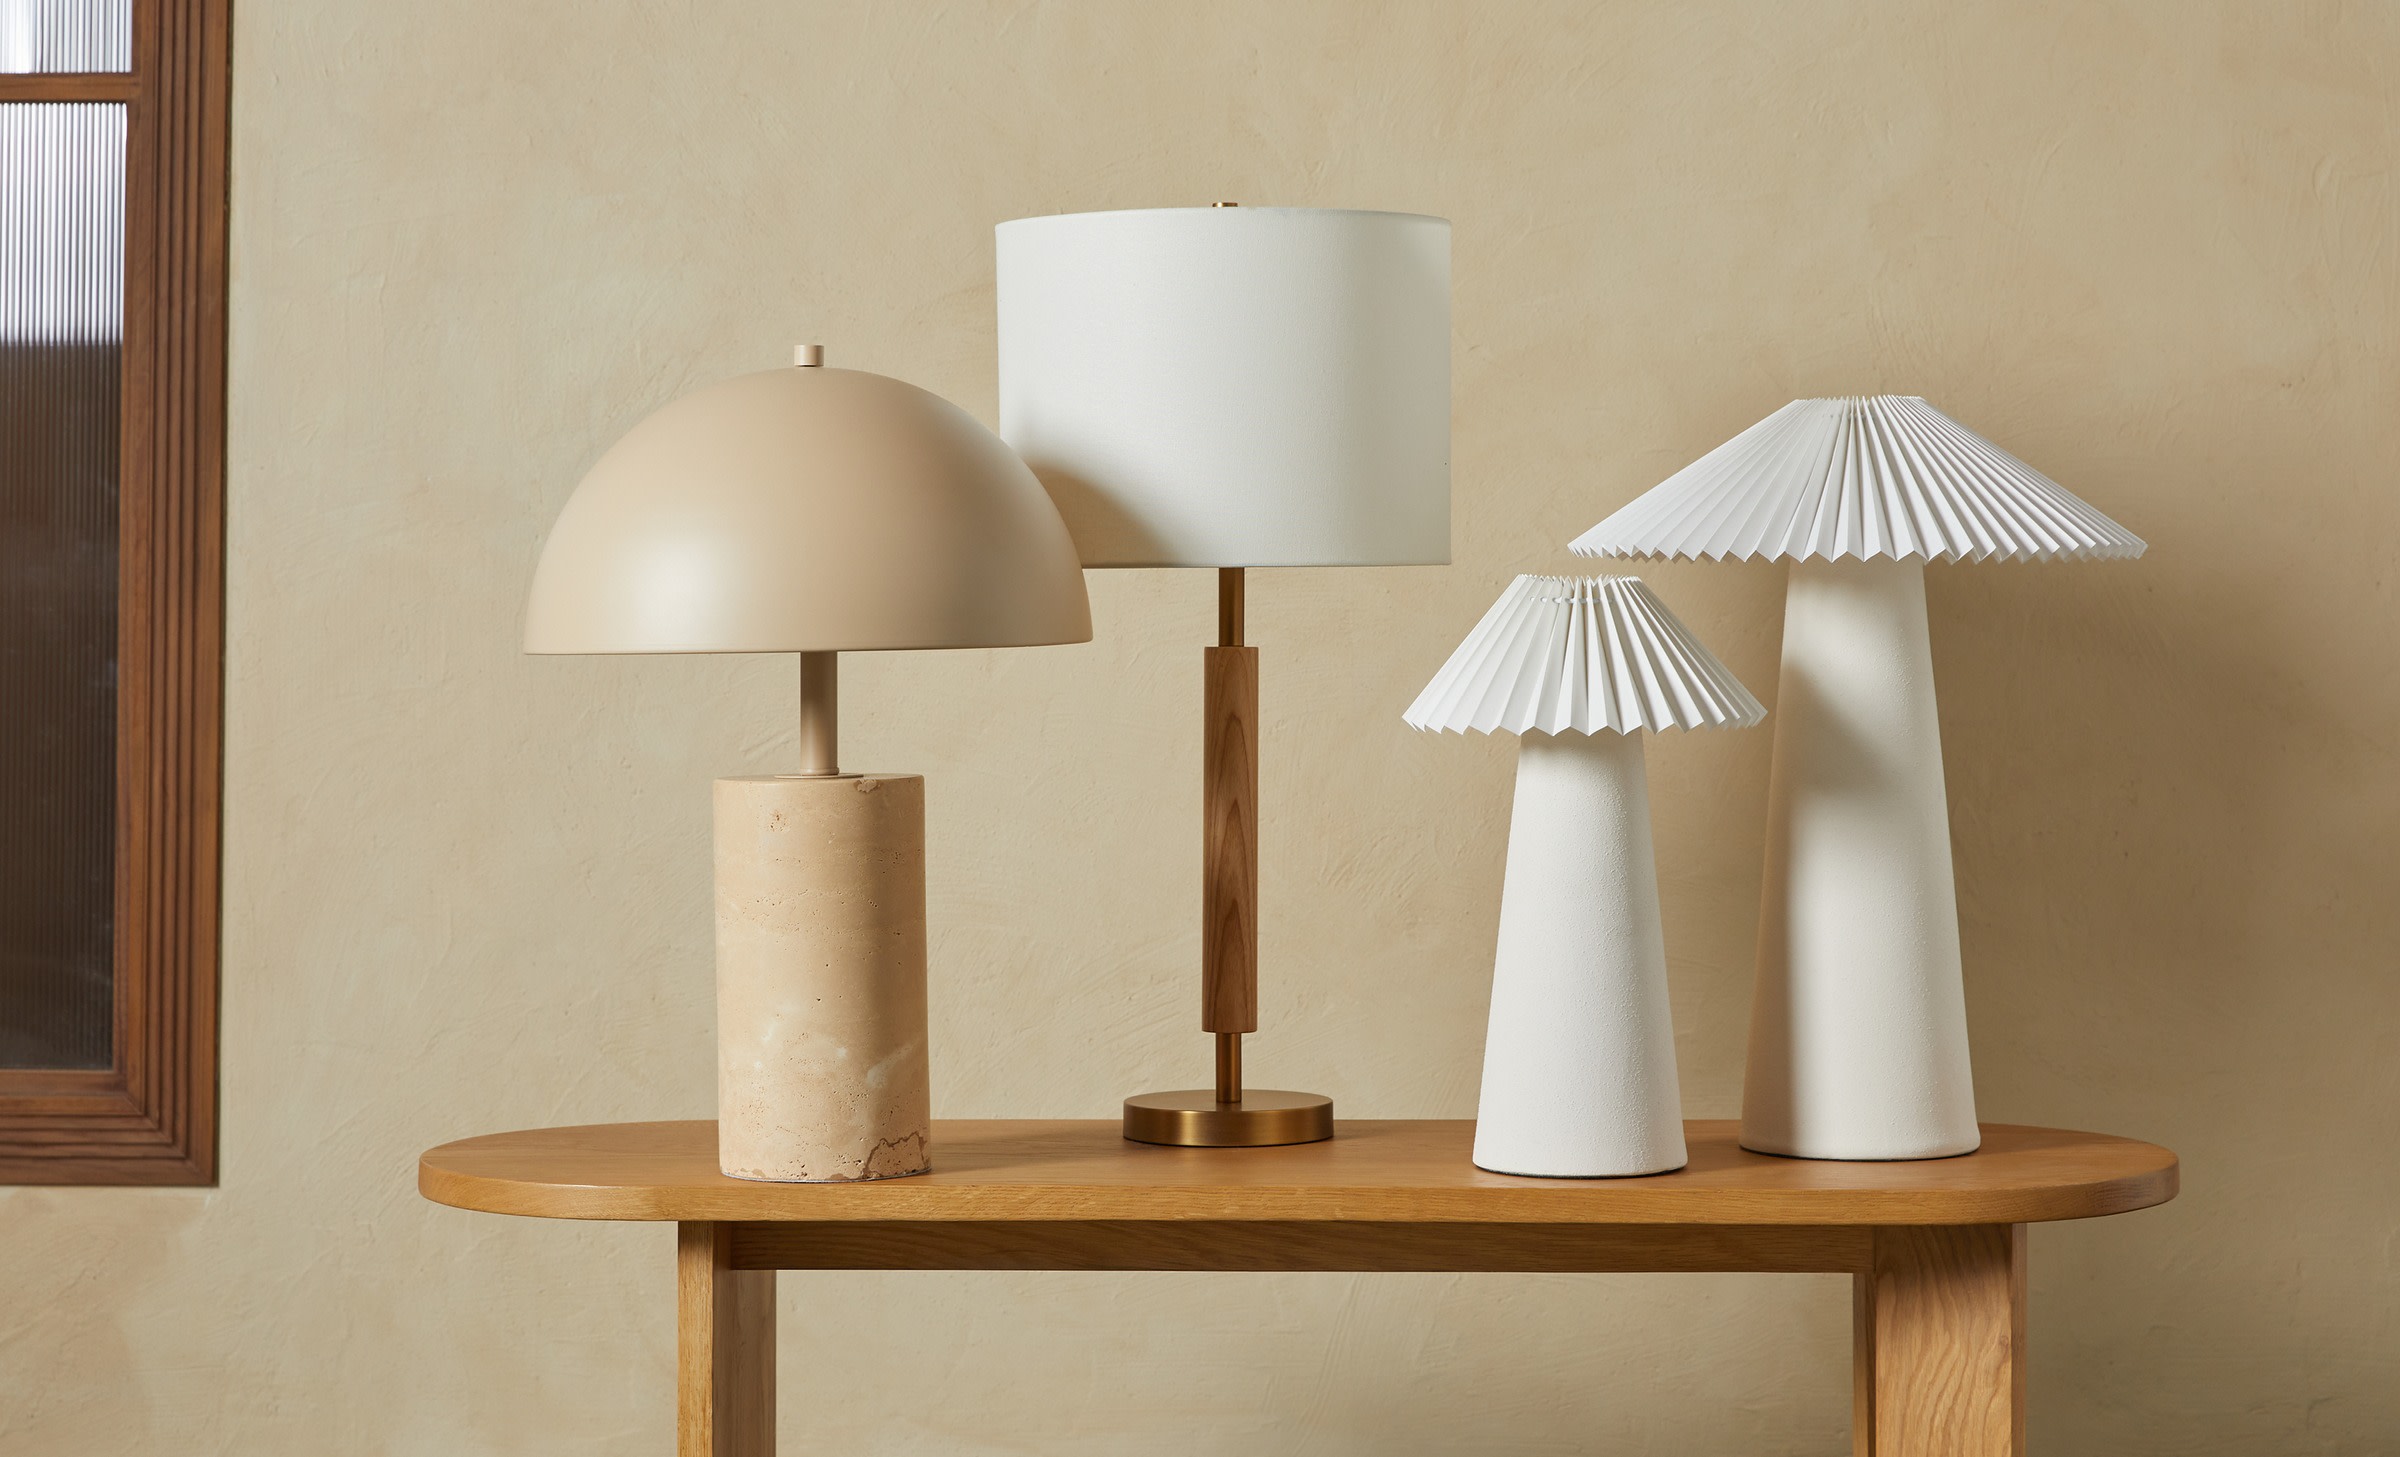 Four table lamps made of stone, porcelain, wood, and brass stacked on a white oak wood bench